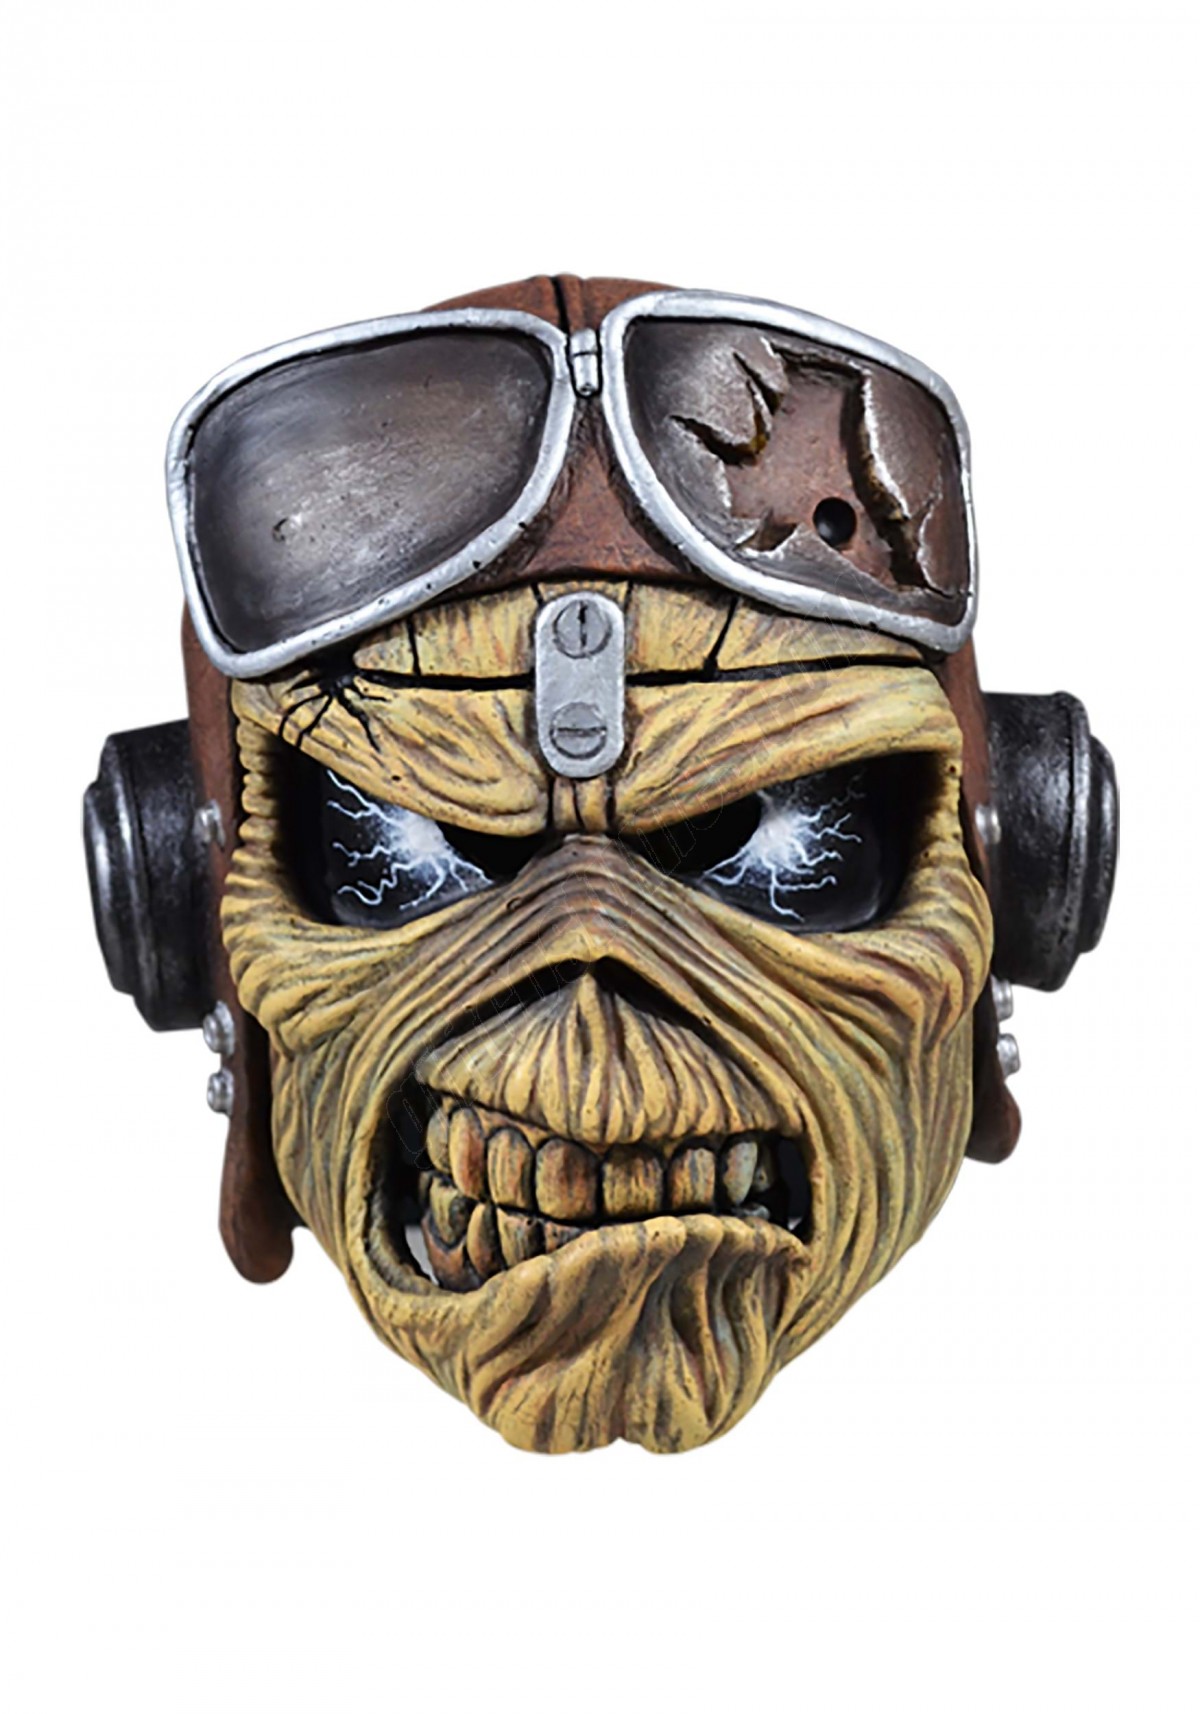 Iron Maiden Aces High Mask Promotions - -0